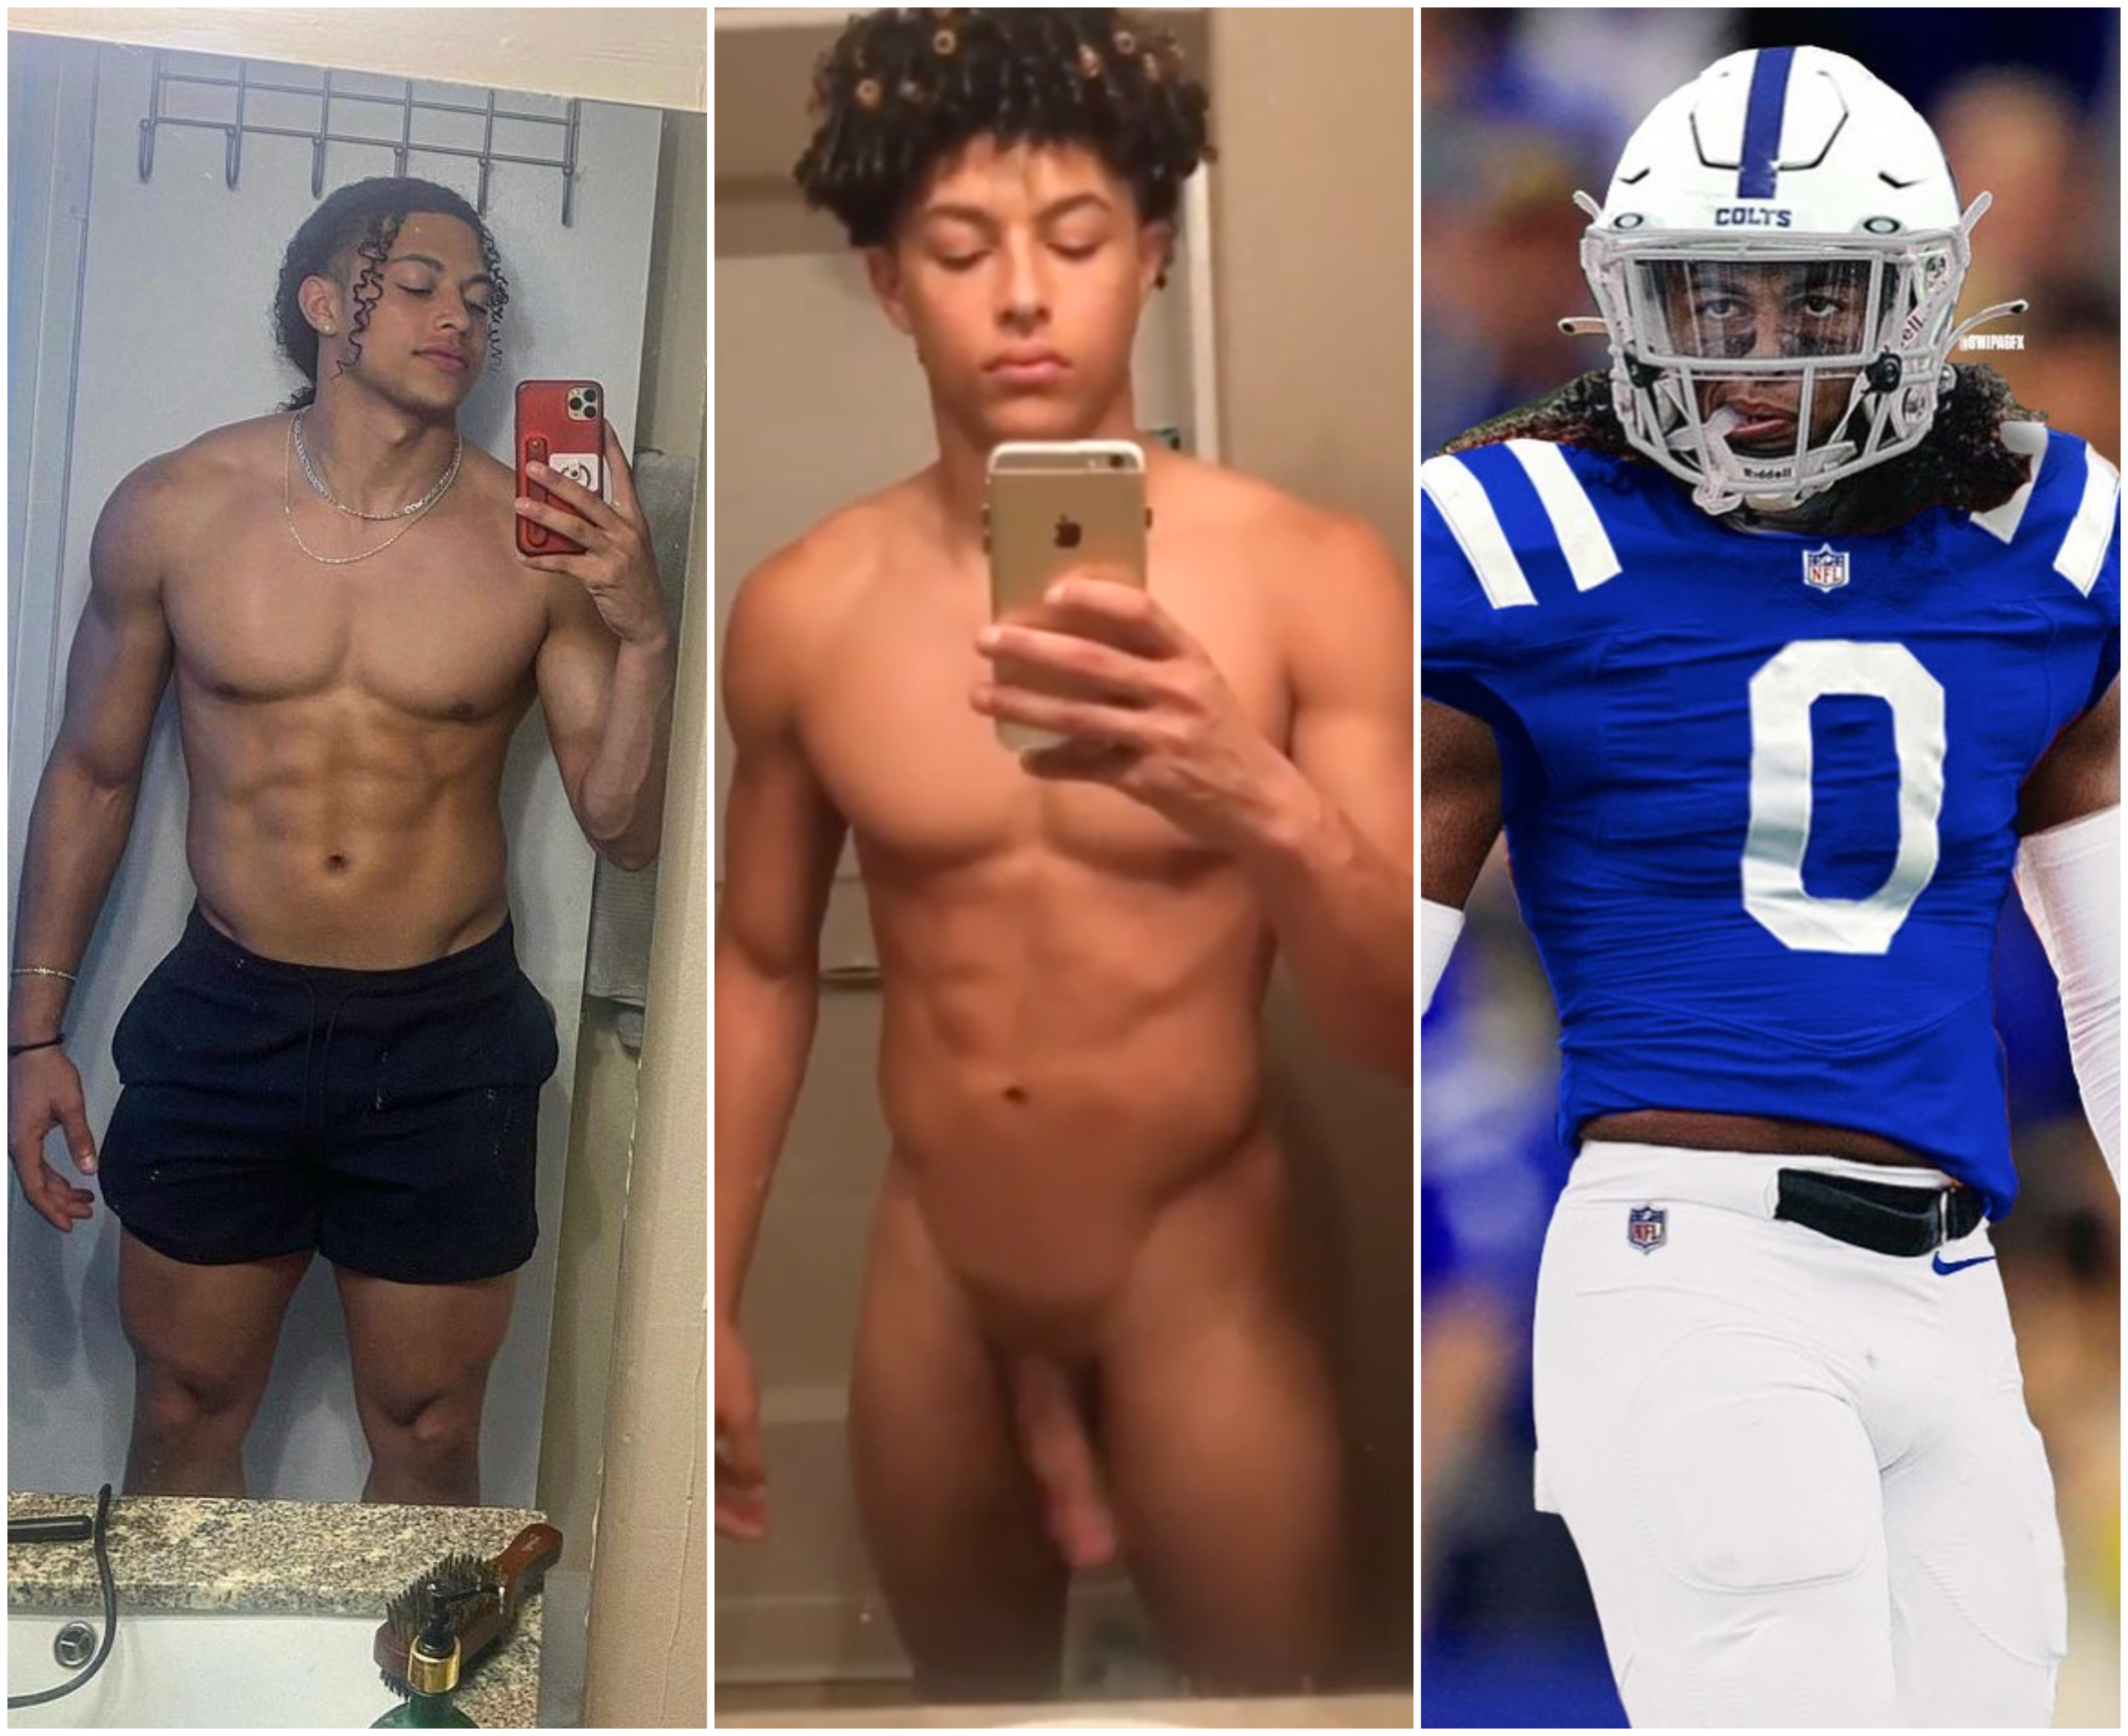 The absolutes NFL Footballer jerking off and… ThisVid pic